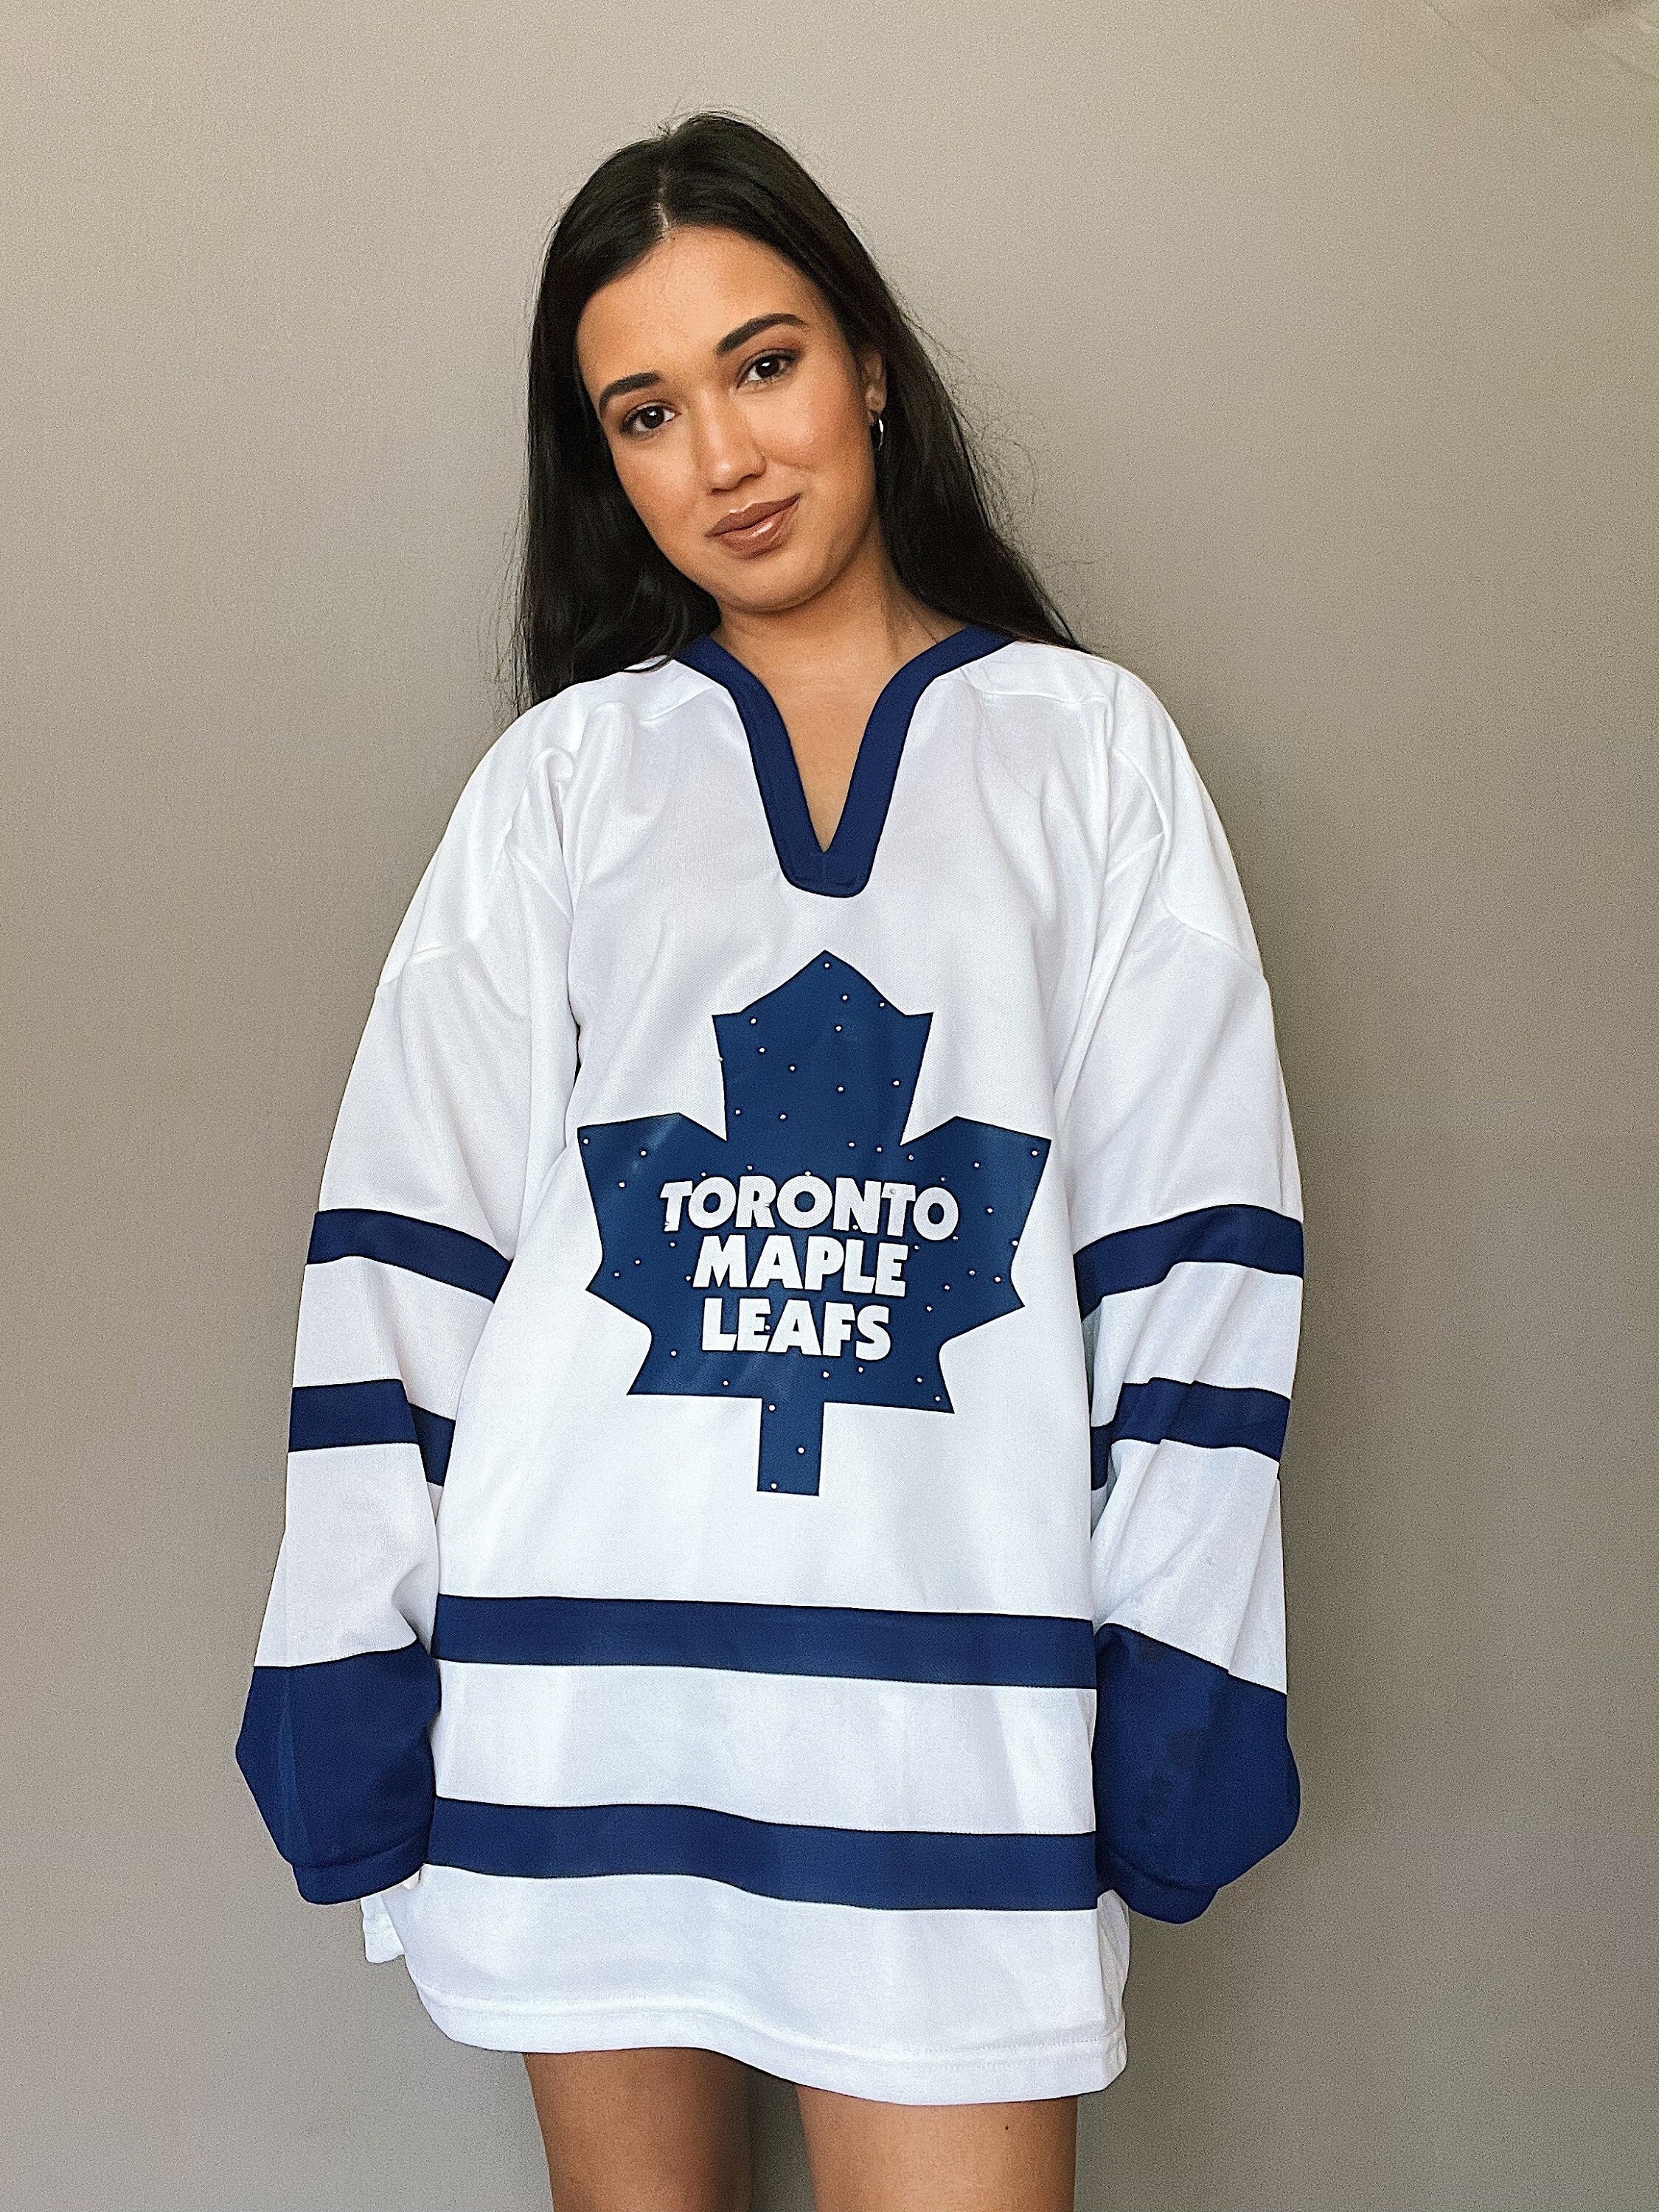 Toronto Maple Leafs Dress  Jerseys outfit, Clothes, Jersey dress